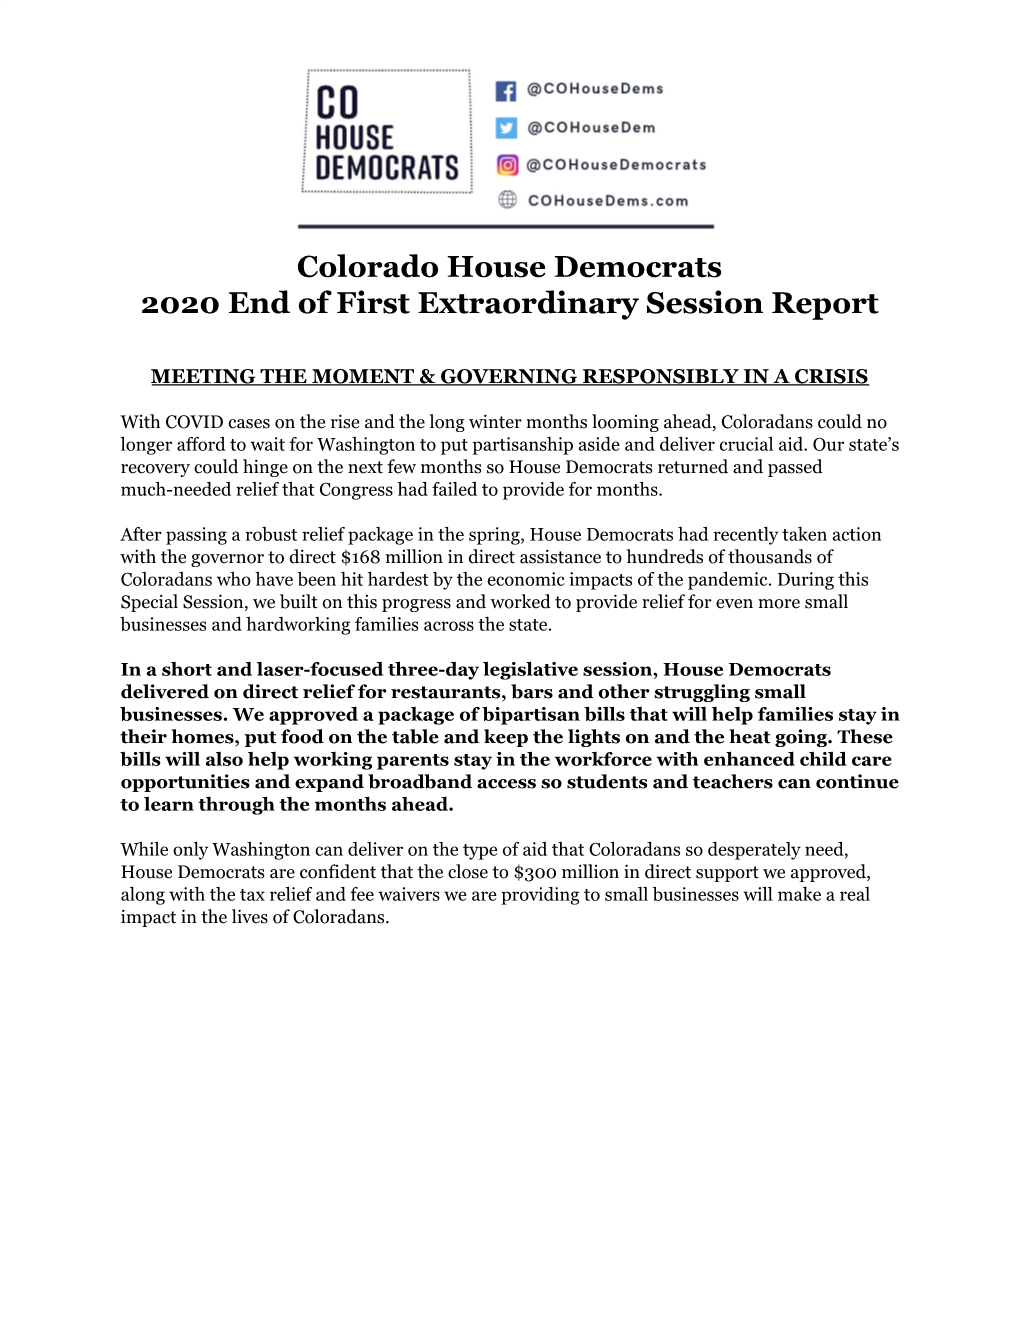 Colorado House Democrats 2020 End of First Extraordinary Session Report